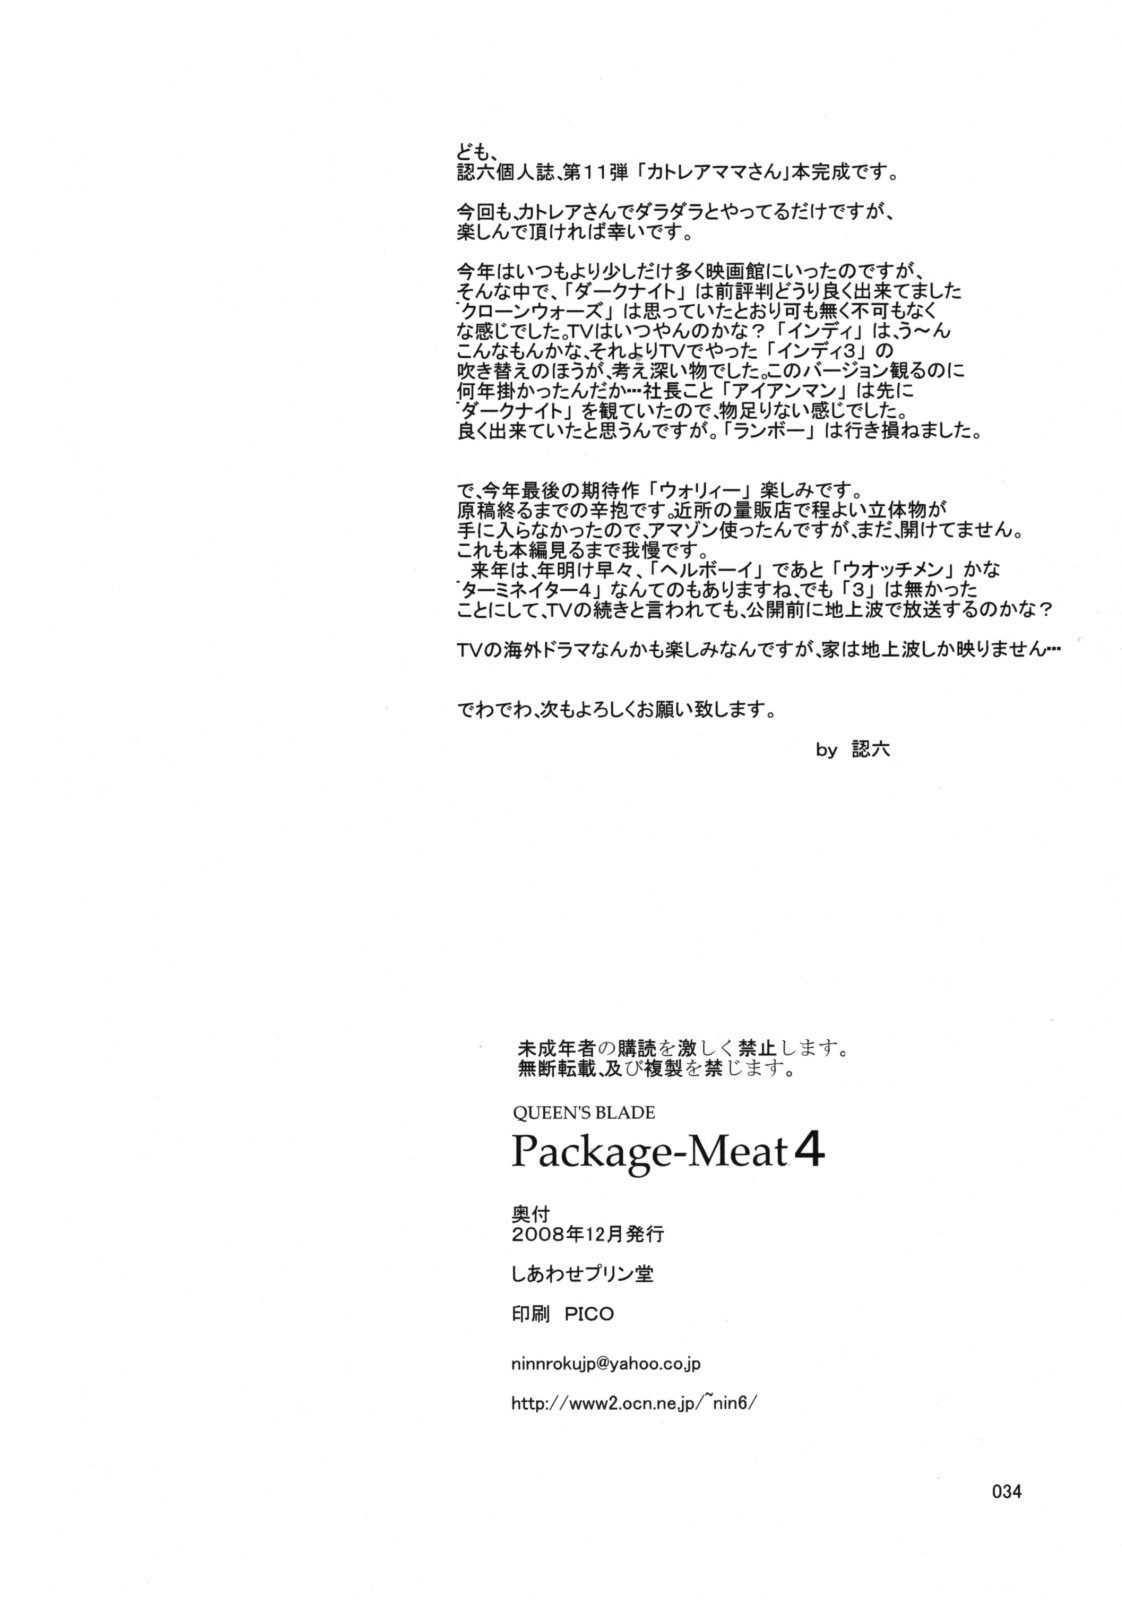 Package Meat 4 - 31